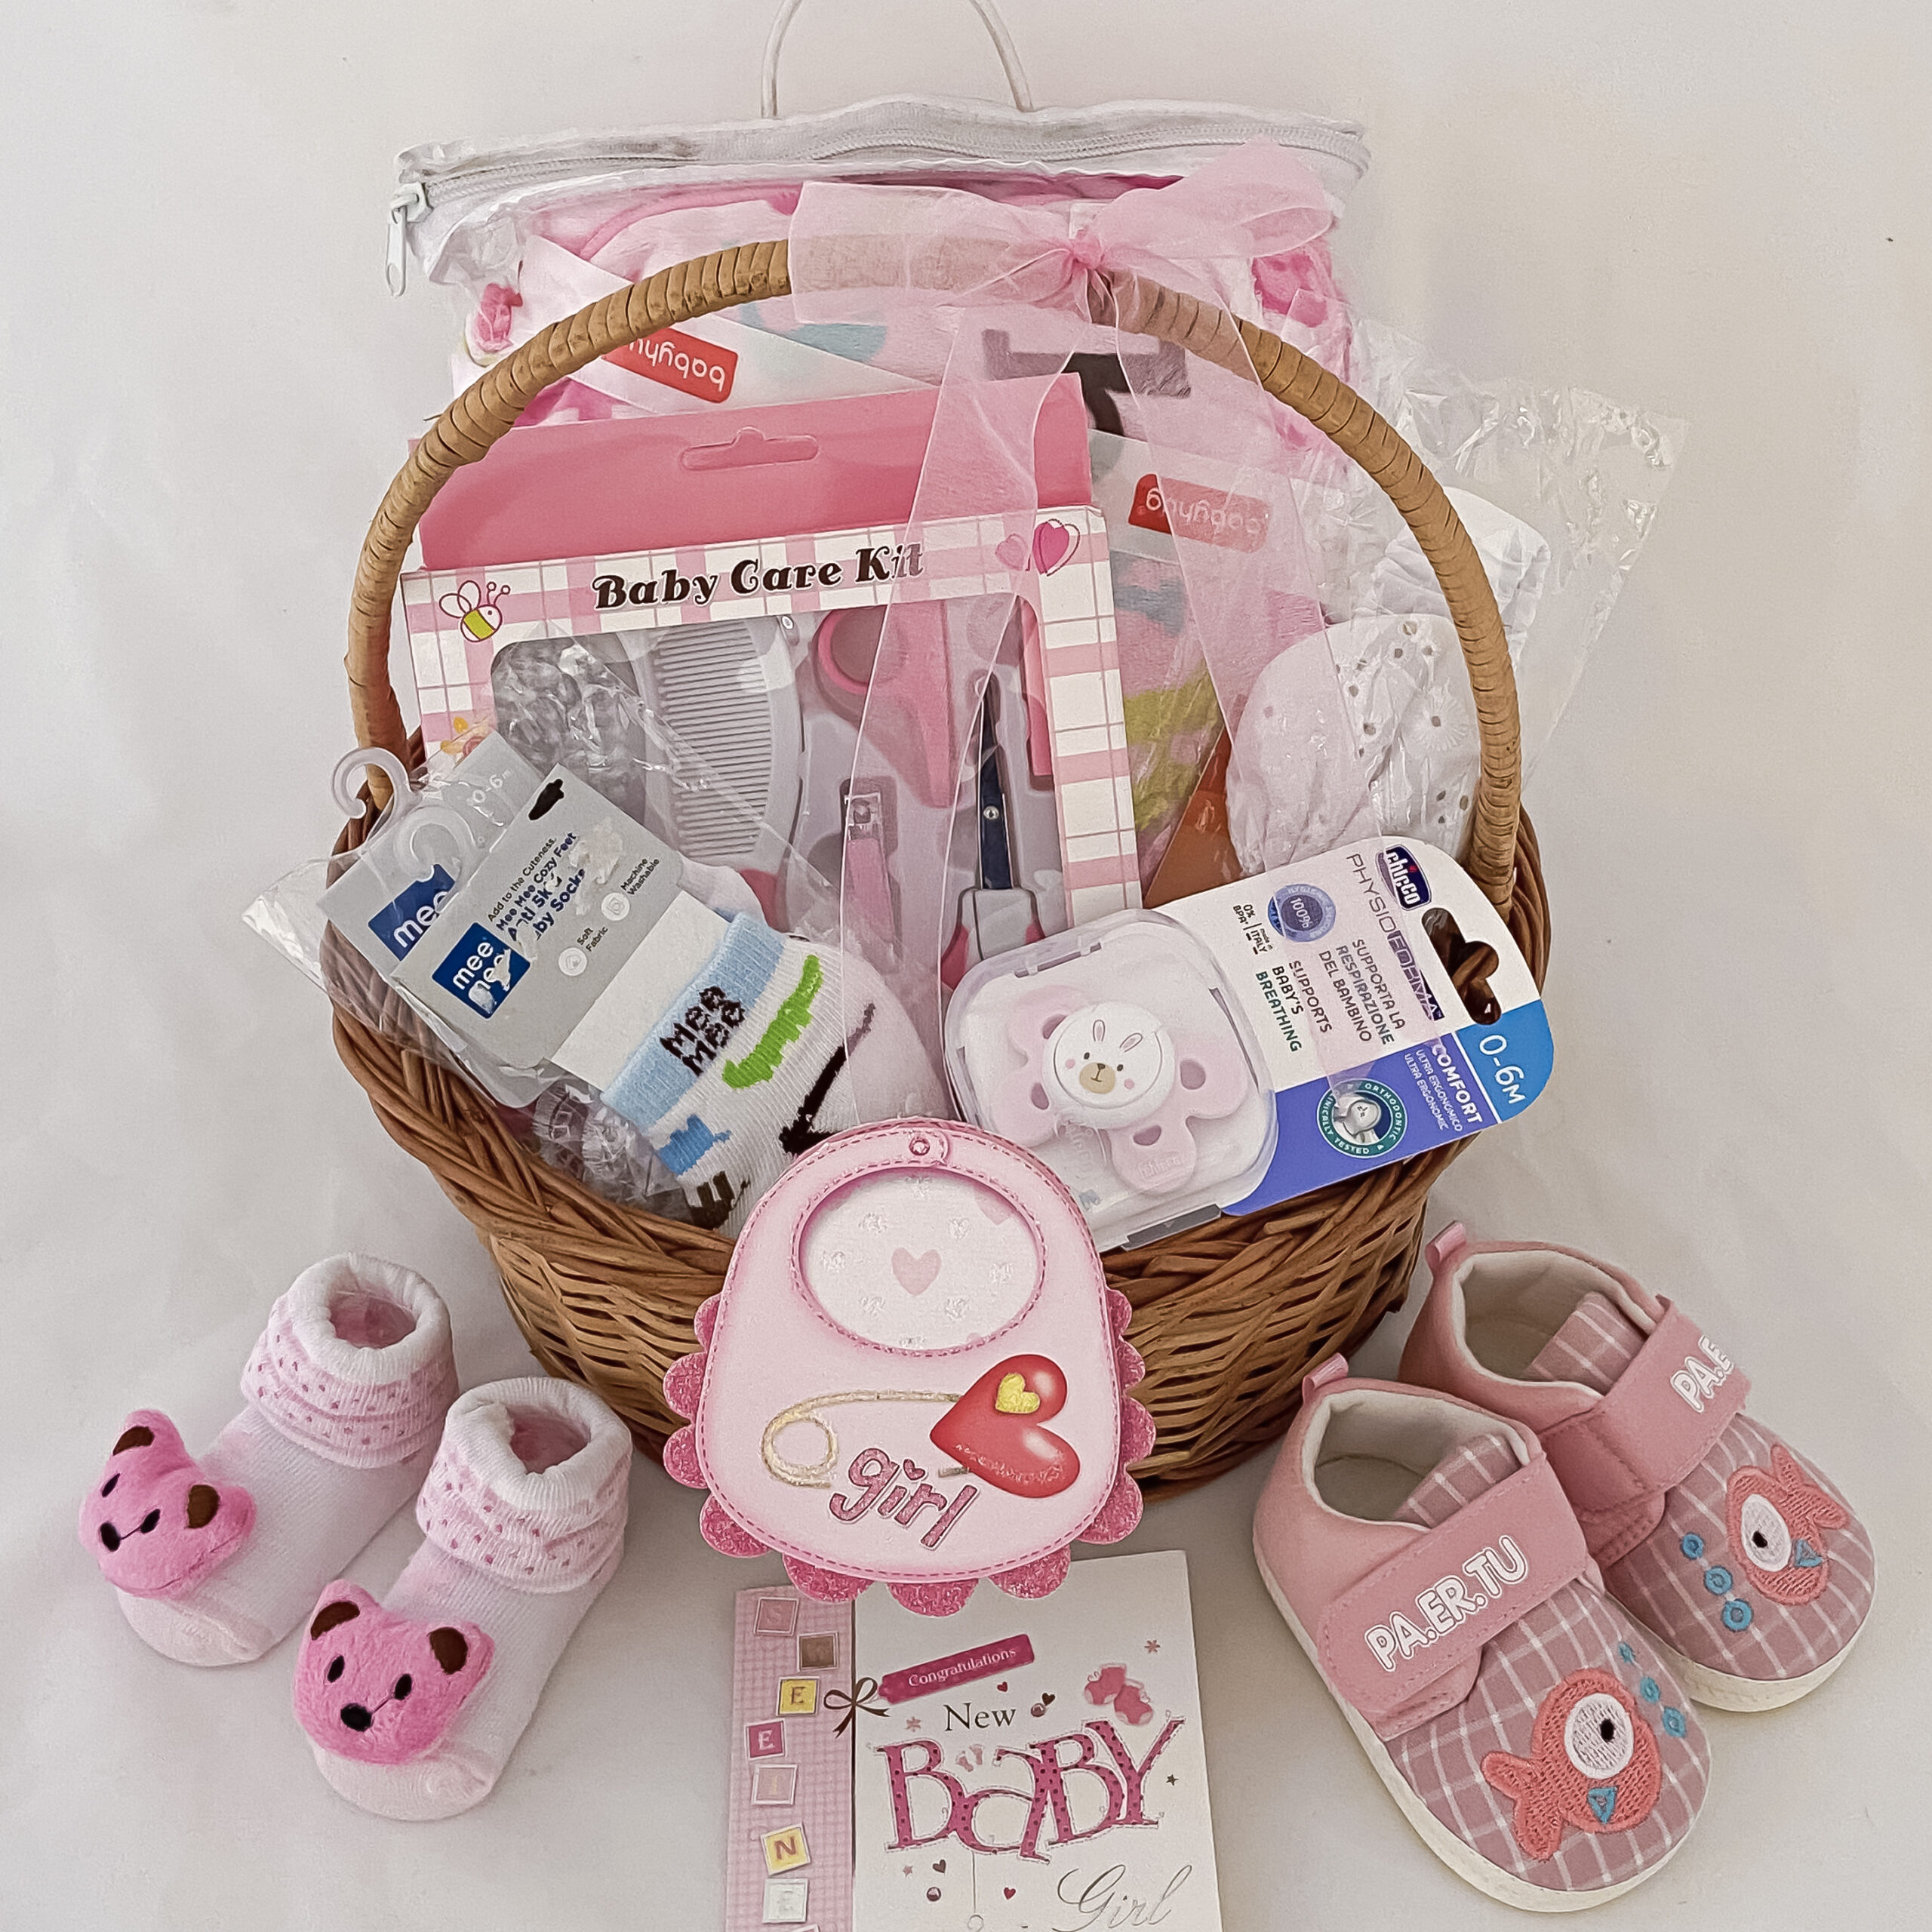 Amazon.com : iAOVUEBY Baby Gift Set for Newborn, Baby Shower Gifts, Wooden Baby  Gift Basket Essentials Includes Infant Swaddle Blanket Onesies Rattle Toy  Hair Bursh, New Born Baby Christmas Gifts for Girls